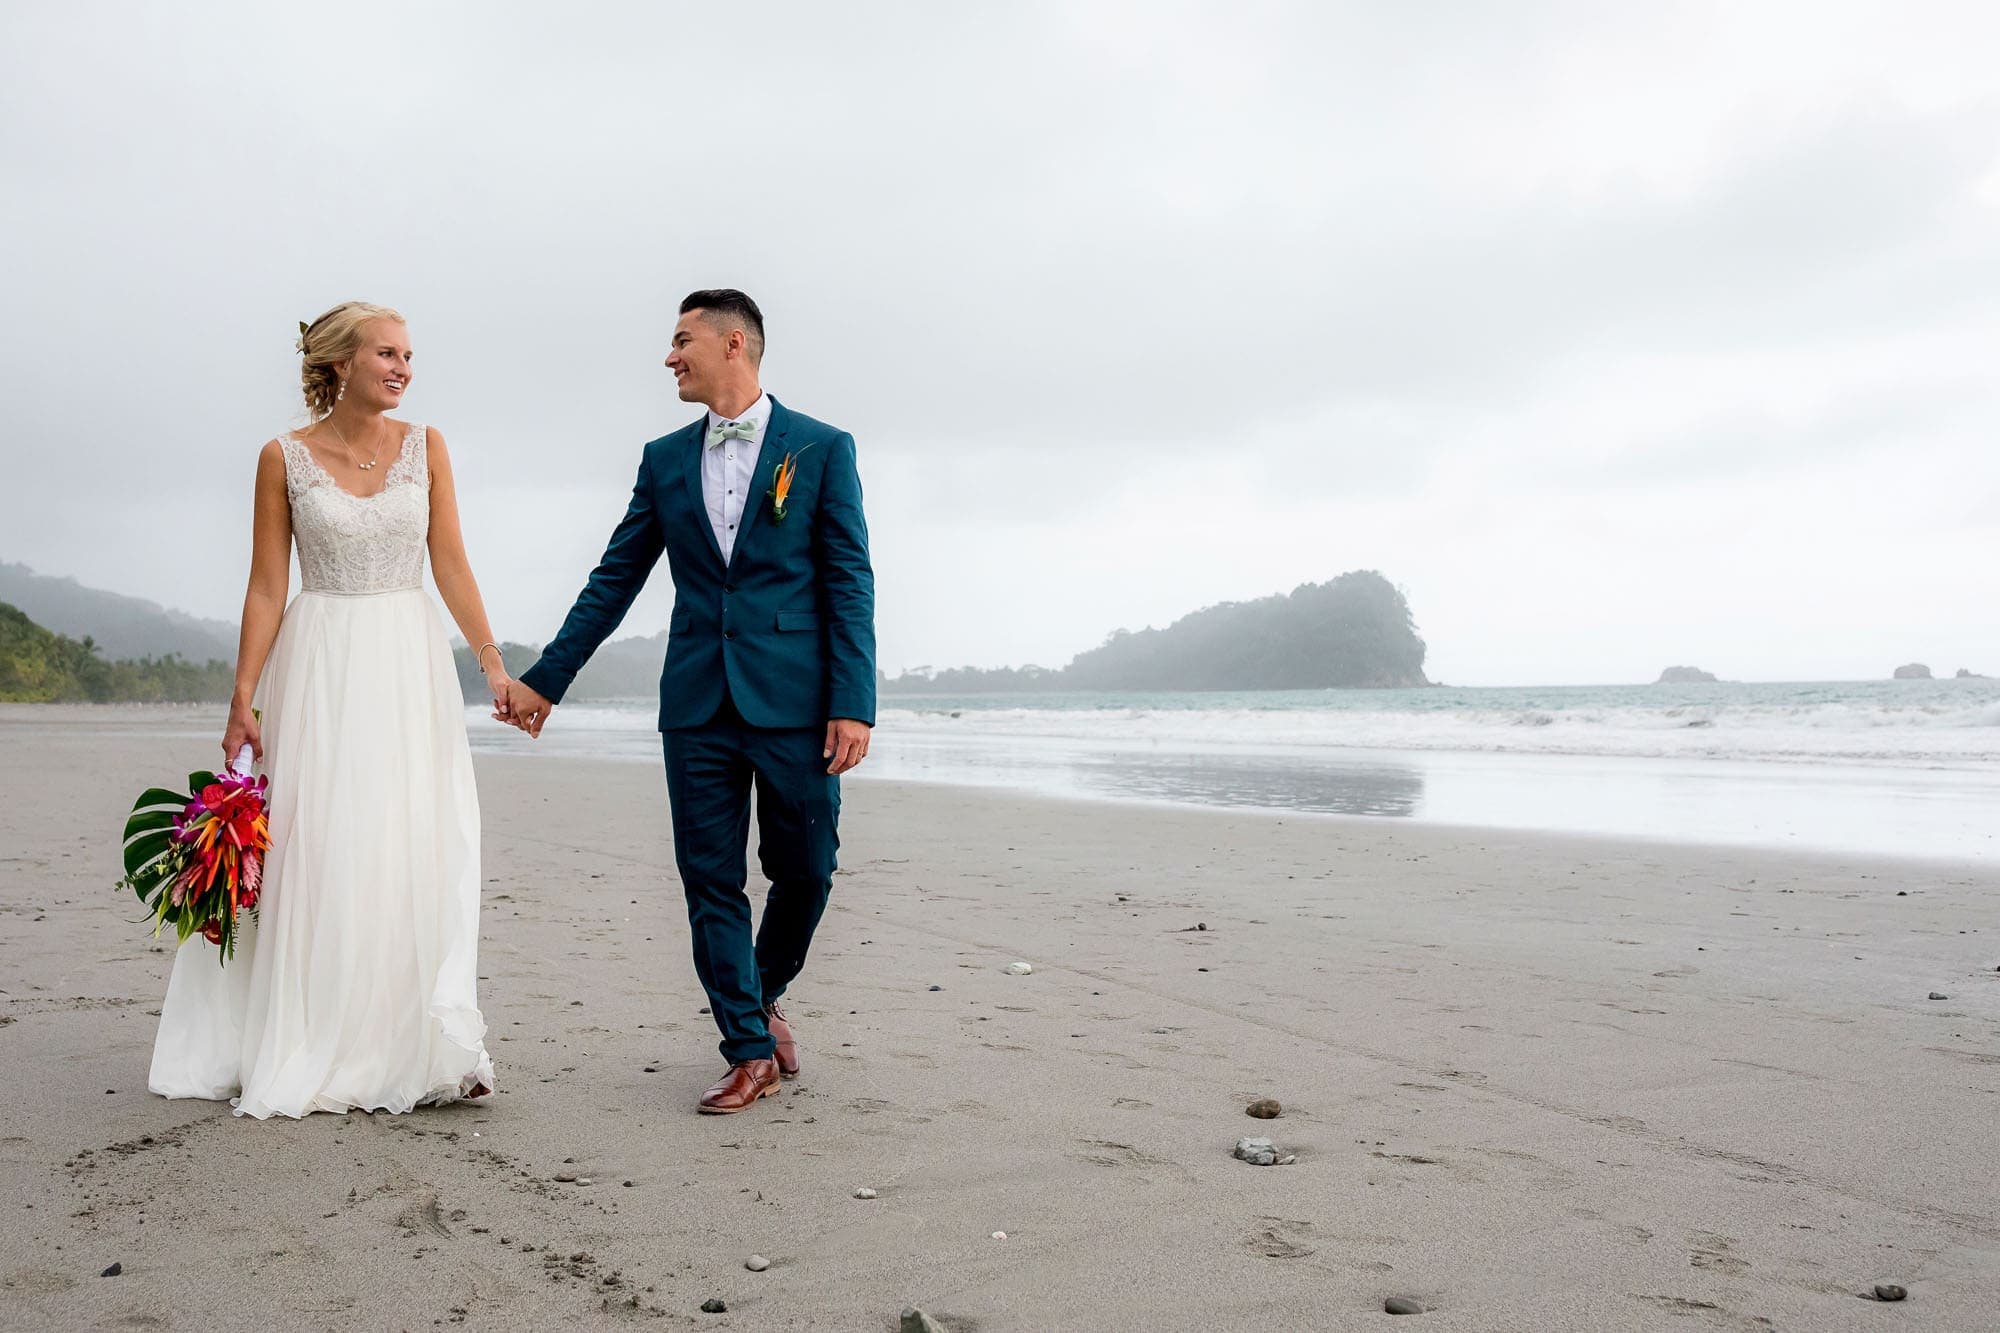 A Spectacular Church Wedding Ceremony in Costa Rica image